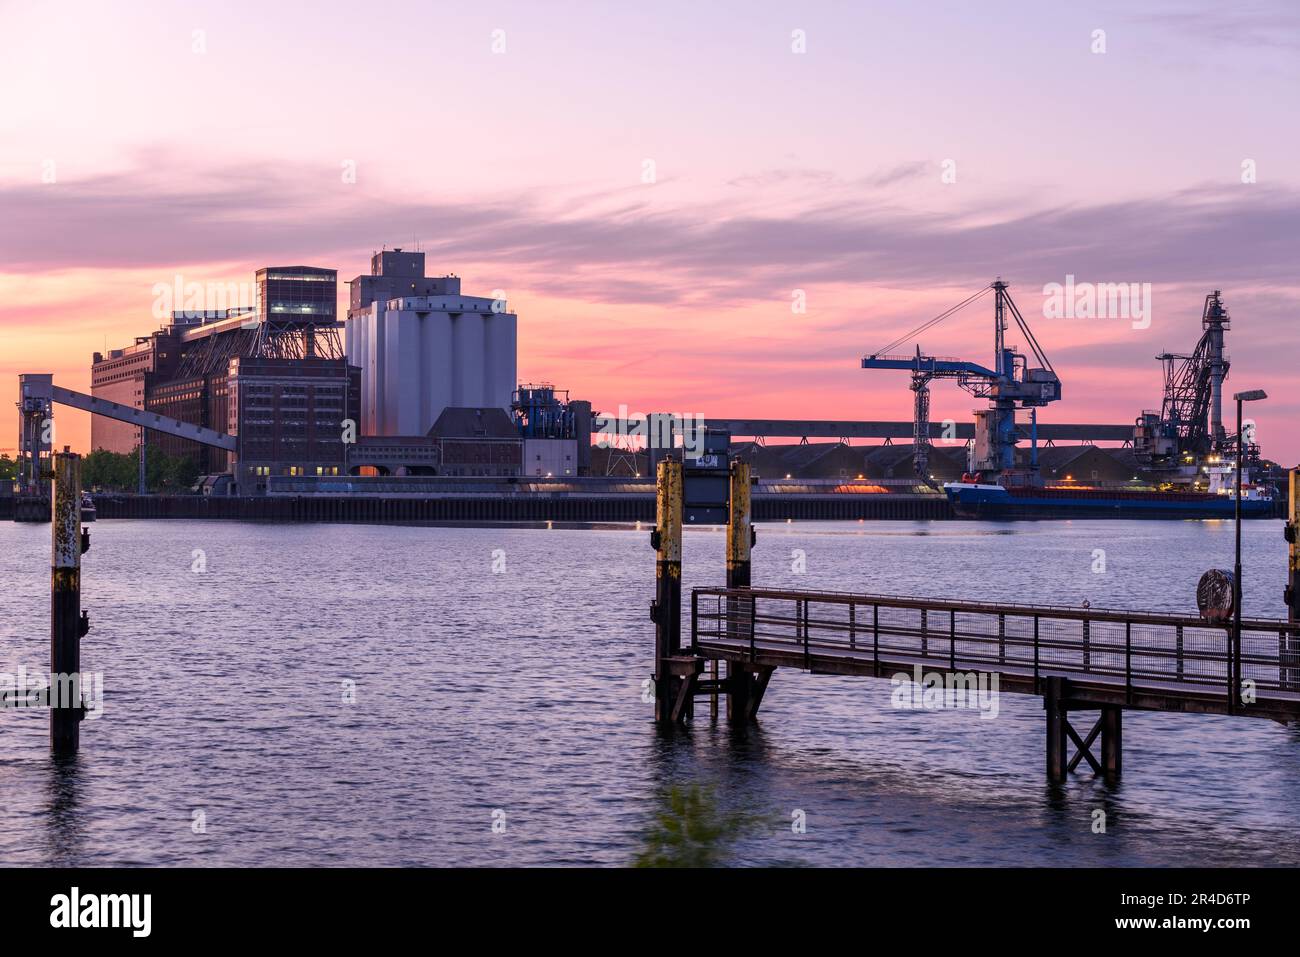 Commercial dock with silos and old warwhouses on a river harbour at dusk Stock Photo